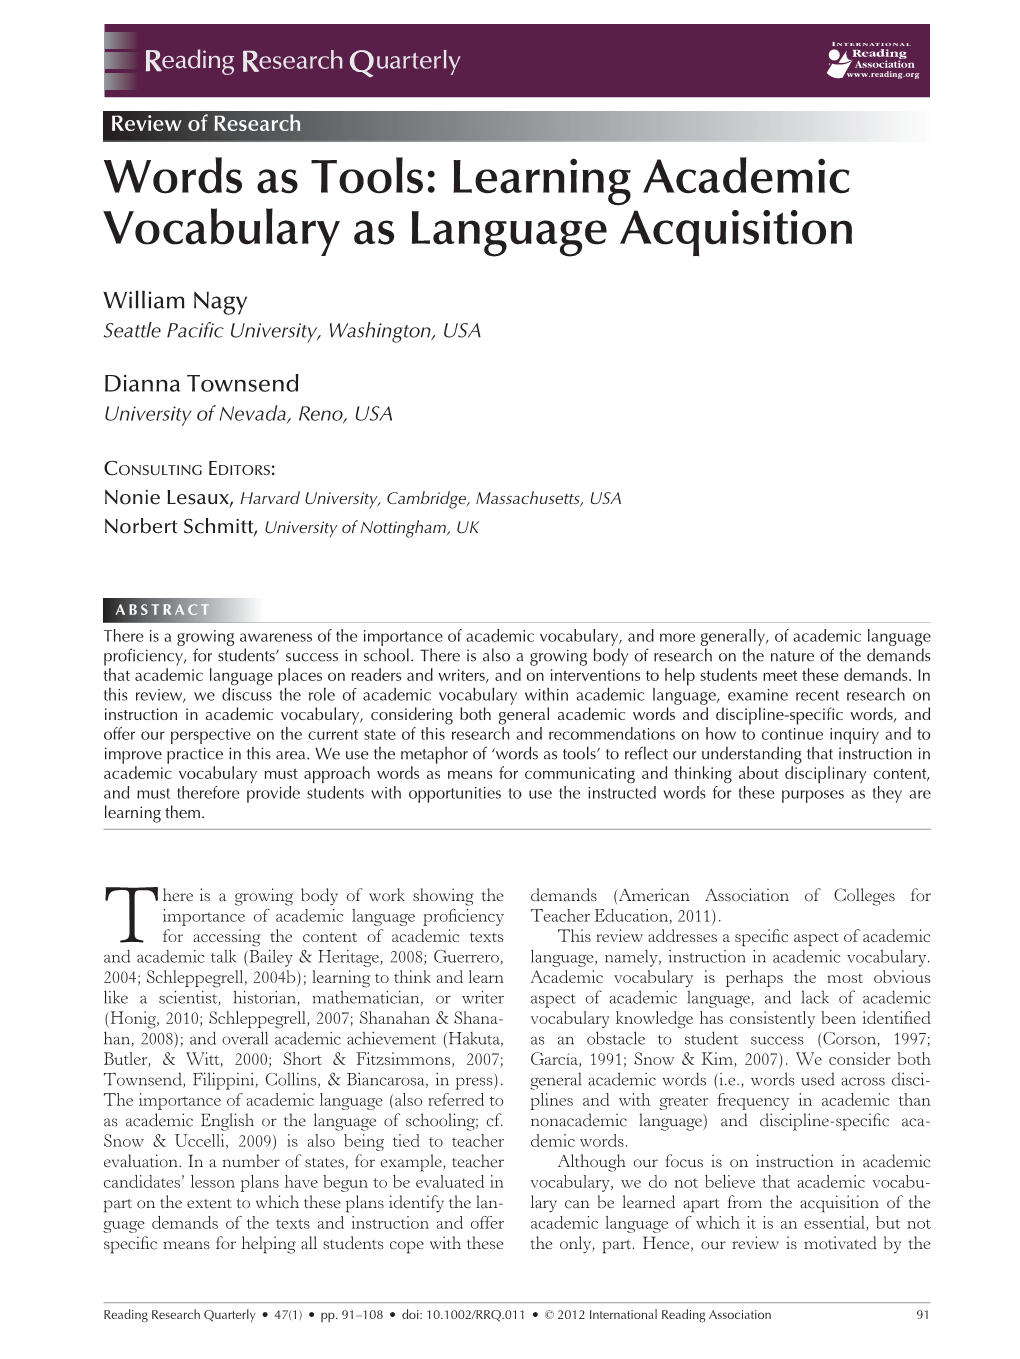 Words As Tools: Learning Academic Vocabulary As Language Acquisition